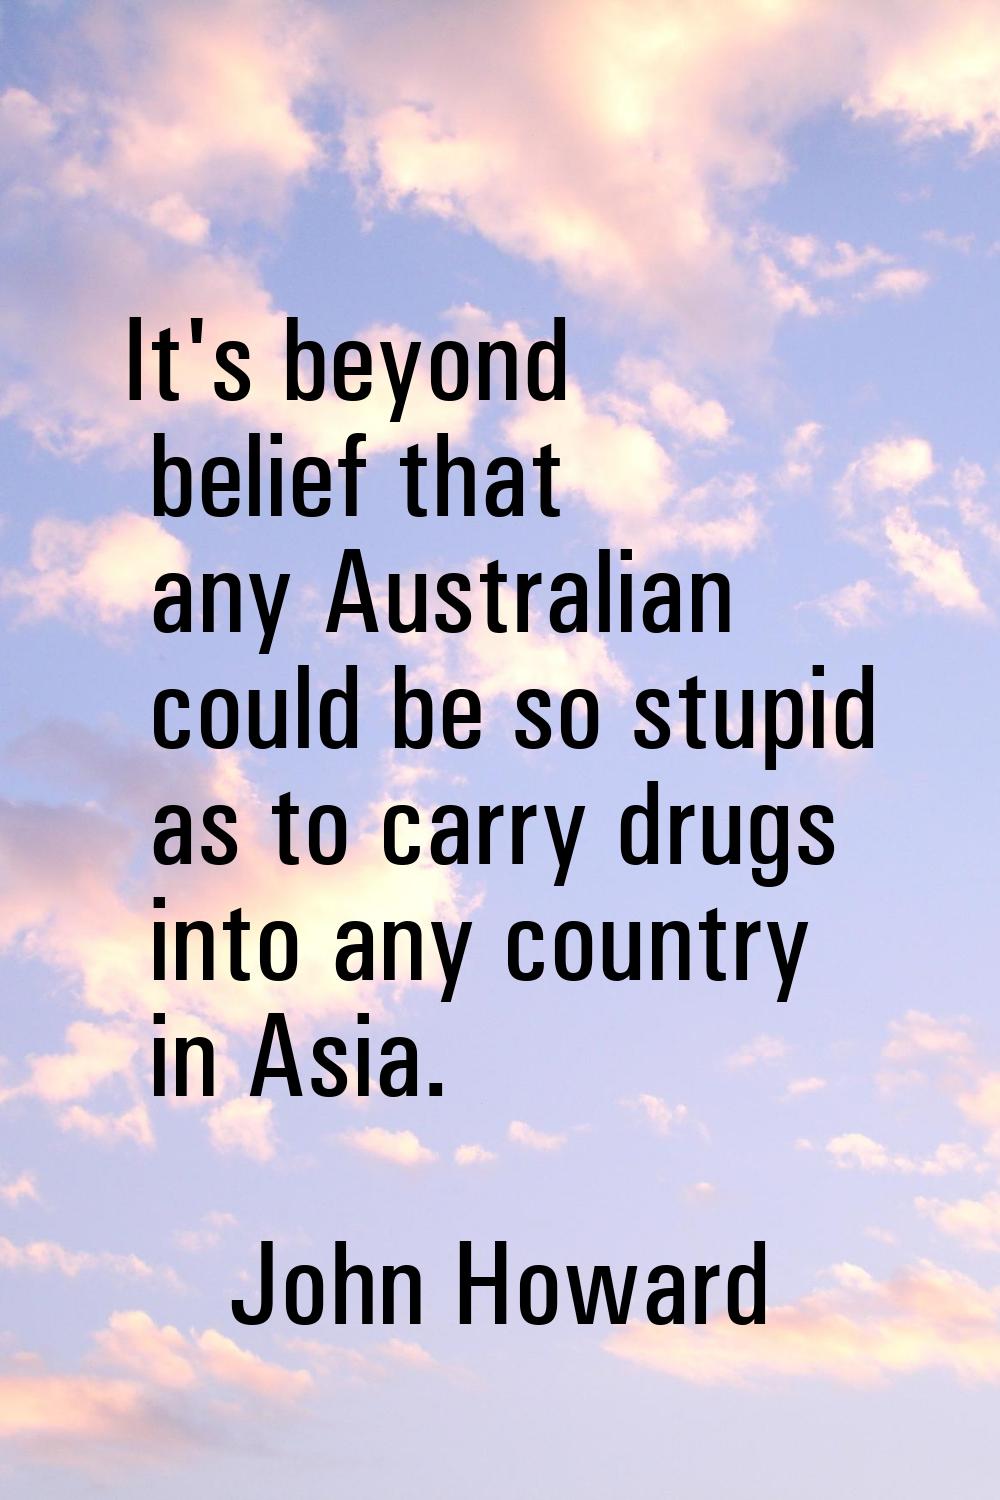 It's beyond belief that any Australian could be so stupid as to carry drugs into any country in Asi